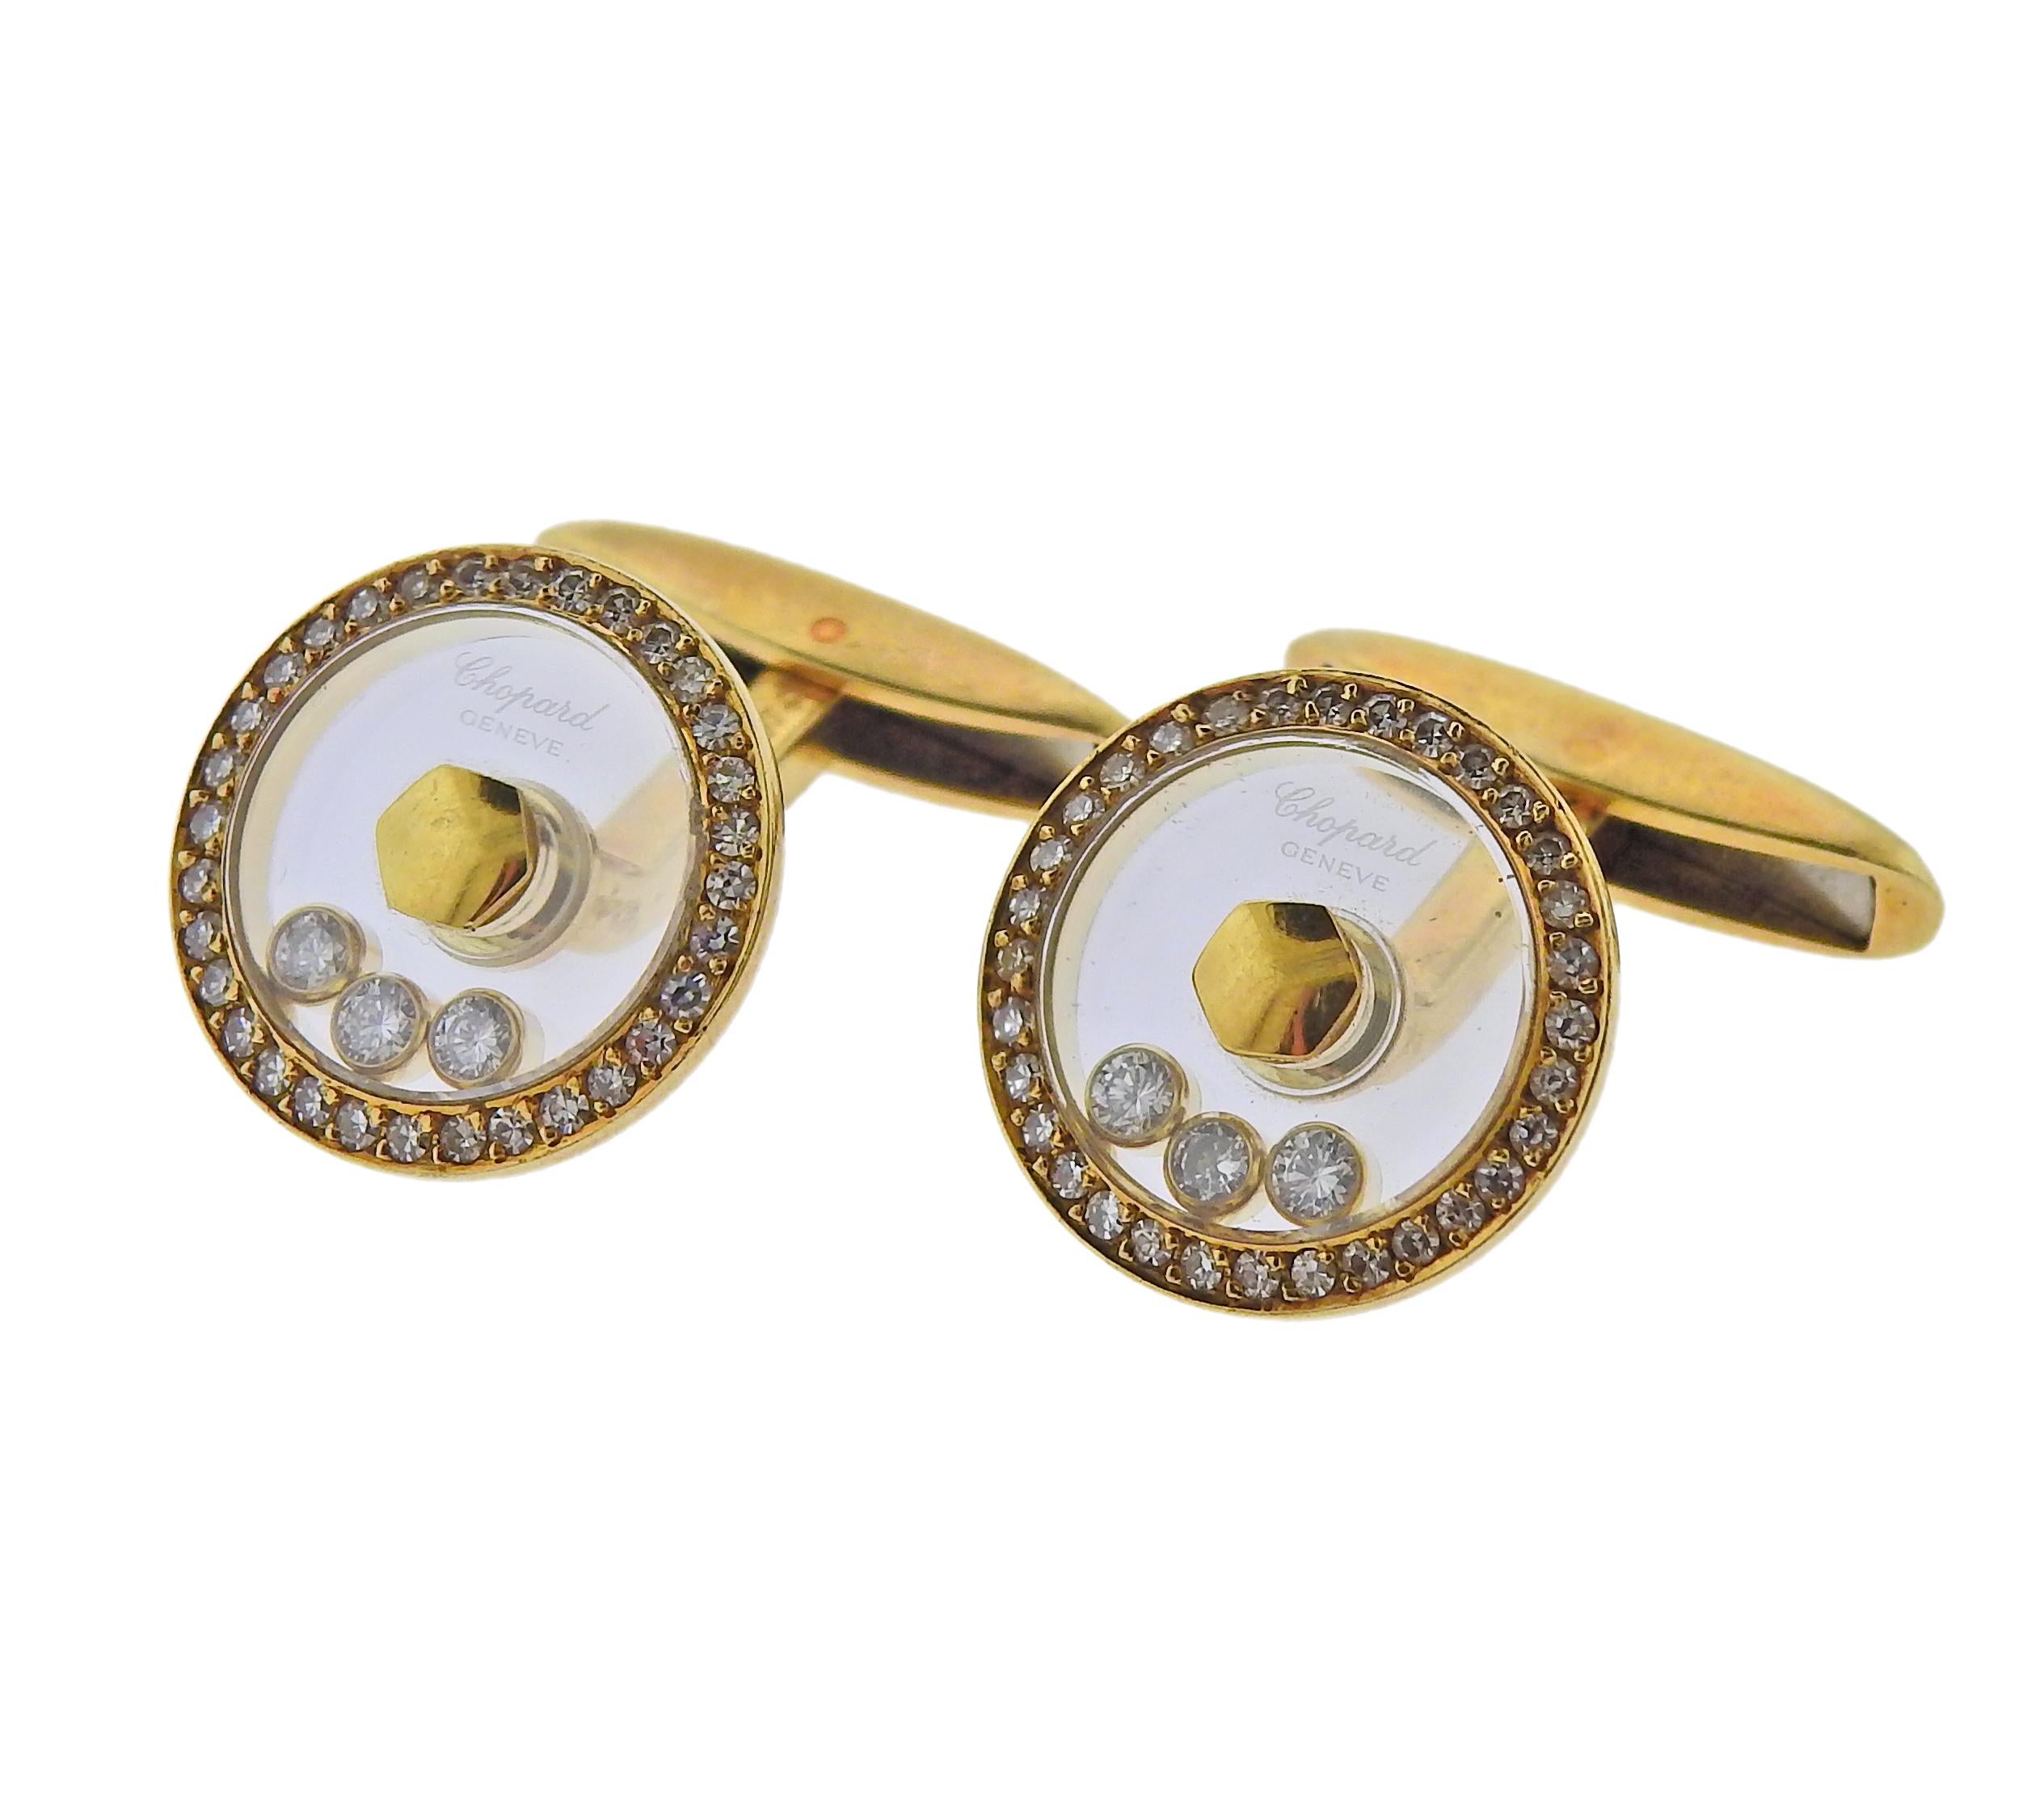 Pair of 18k gold Happy Diamonds cufflinks by Chopard, with approx. 0.70ctw in FG/VVS diamonds.  Cufflink top is 18mm in diameter. Marked: Chopard, 750, LUC. Weight - 17.5 grams. 